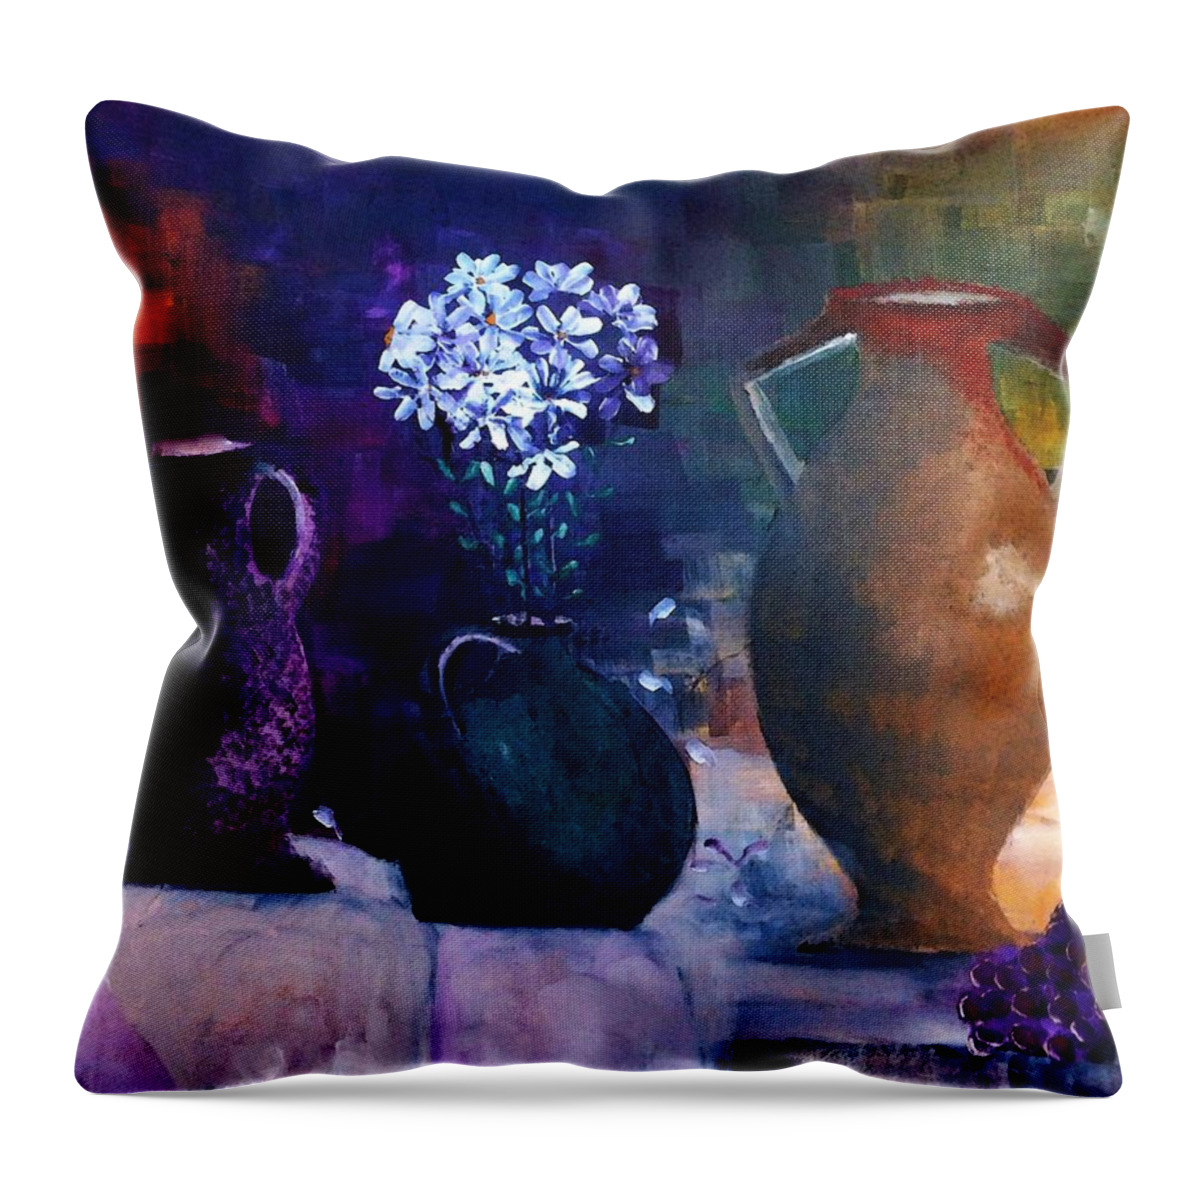  Impressionist Throw Pillow featuring the painting Three Best Friends by Lisa Kaiser